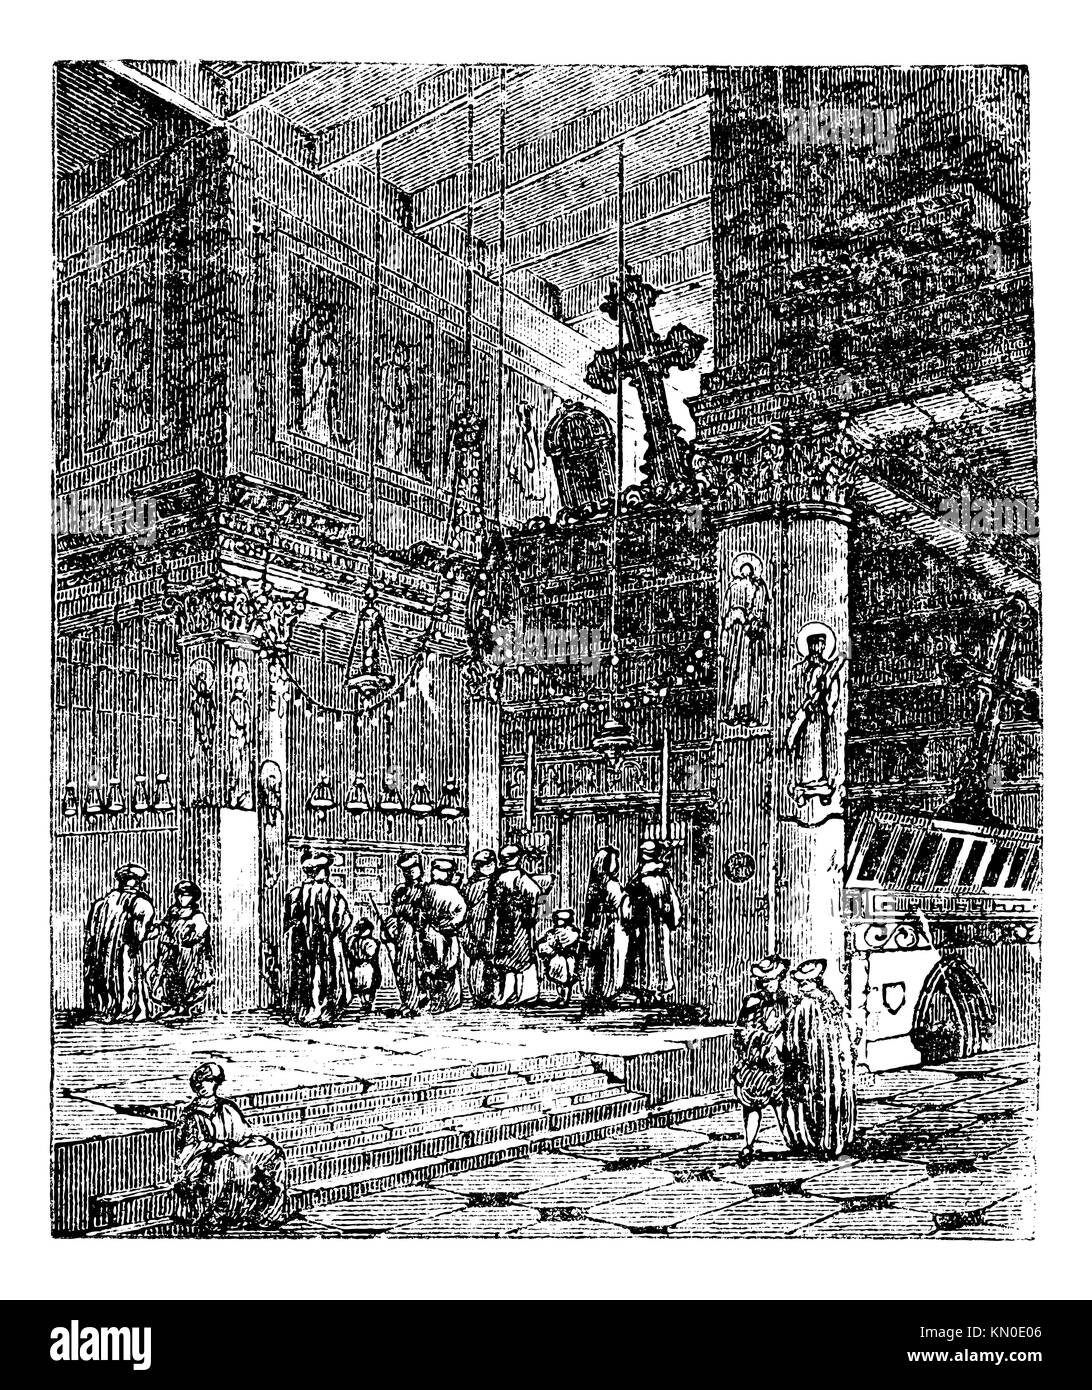 Church of the Nativity, church, Bethlehem, Israel, old engraved illustration of Church of the Nativity, Bethlehem, Israel, in the 1890s Stock Photo